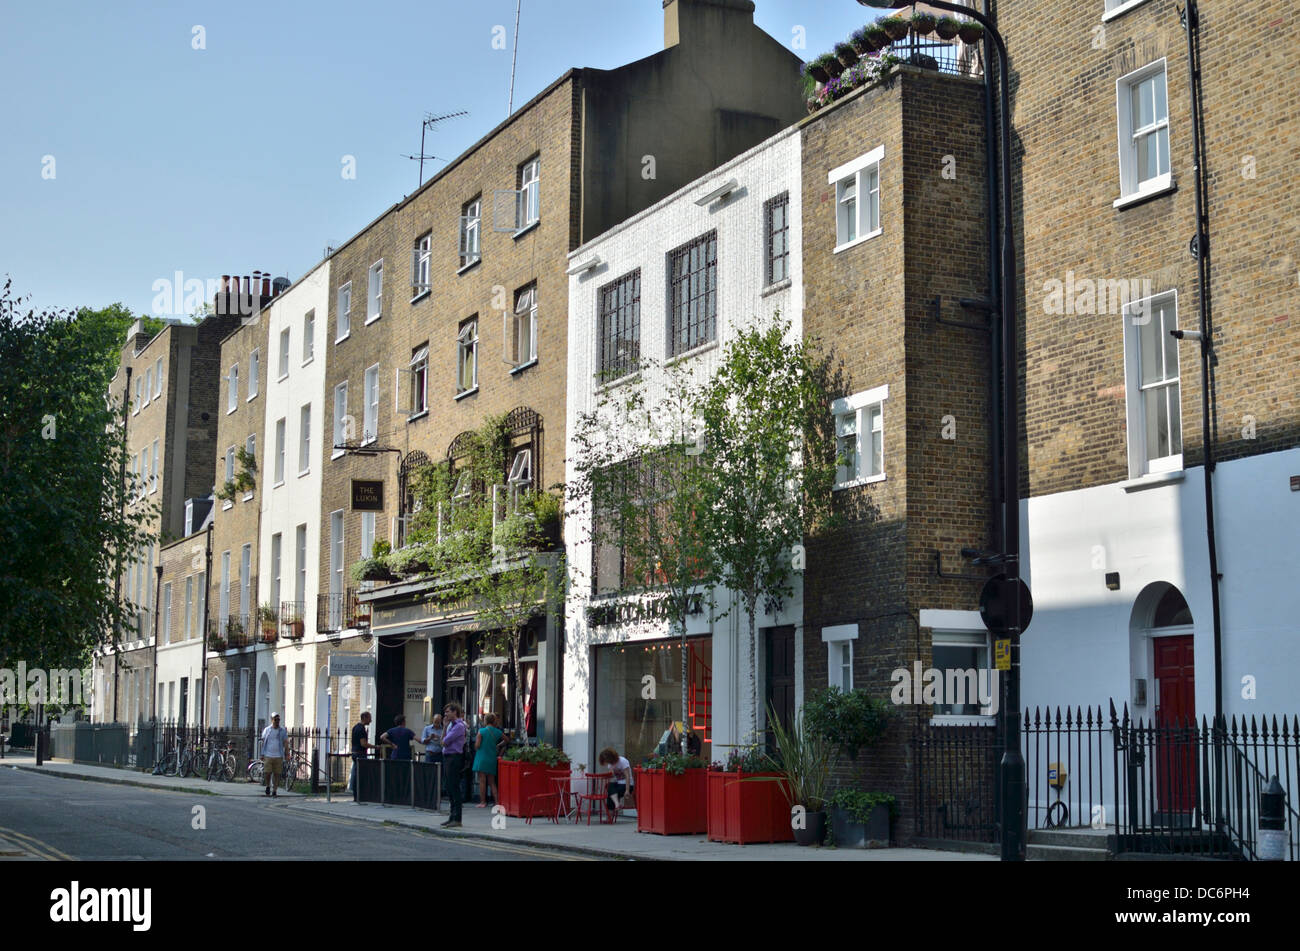 Conway Street W1, Fitzrovia, Londres, Royaume-Uni. Banque D'Images